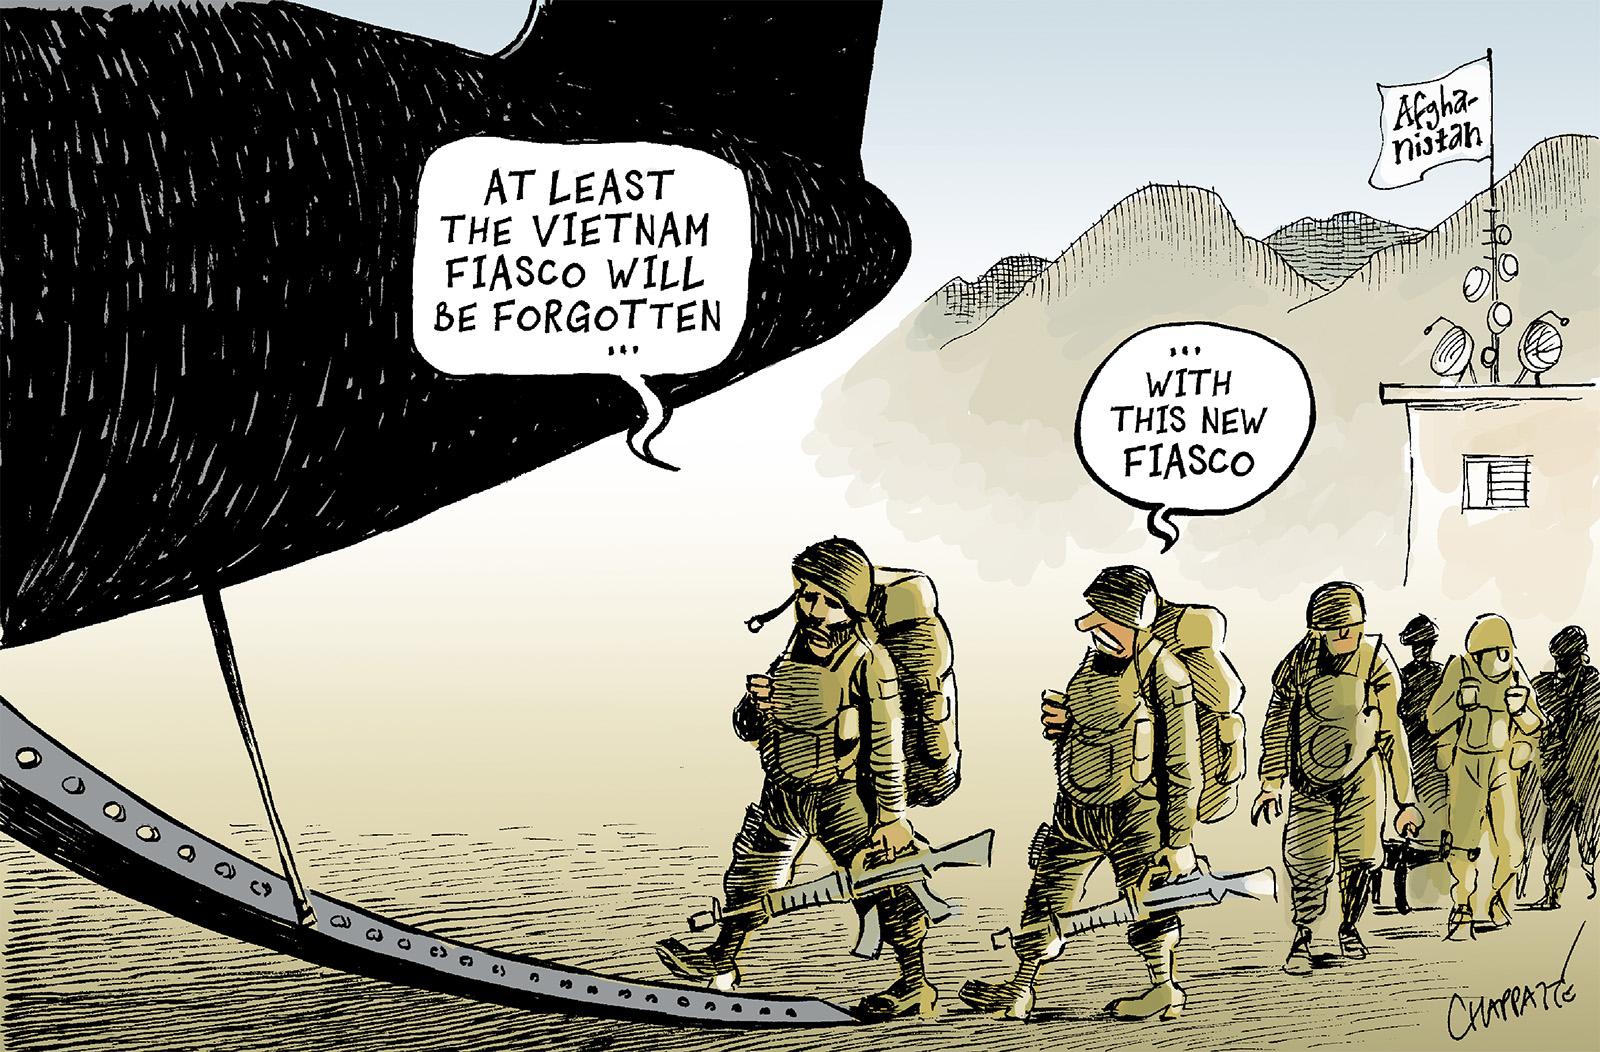 Out of Afghanistan